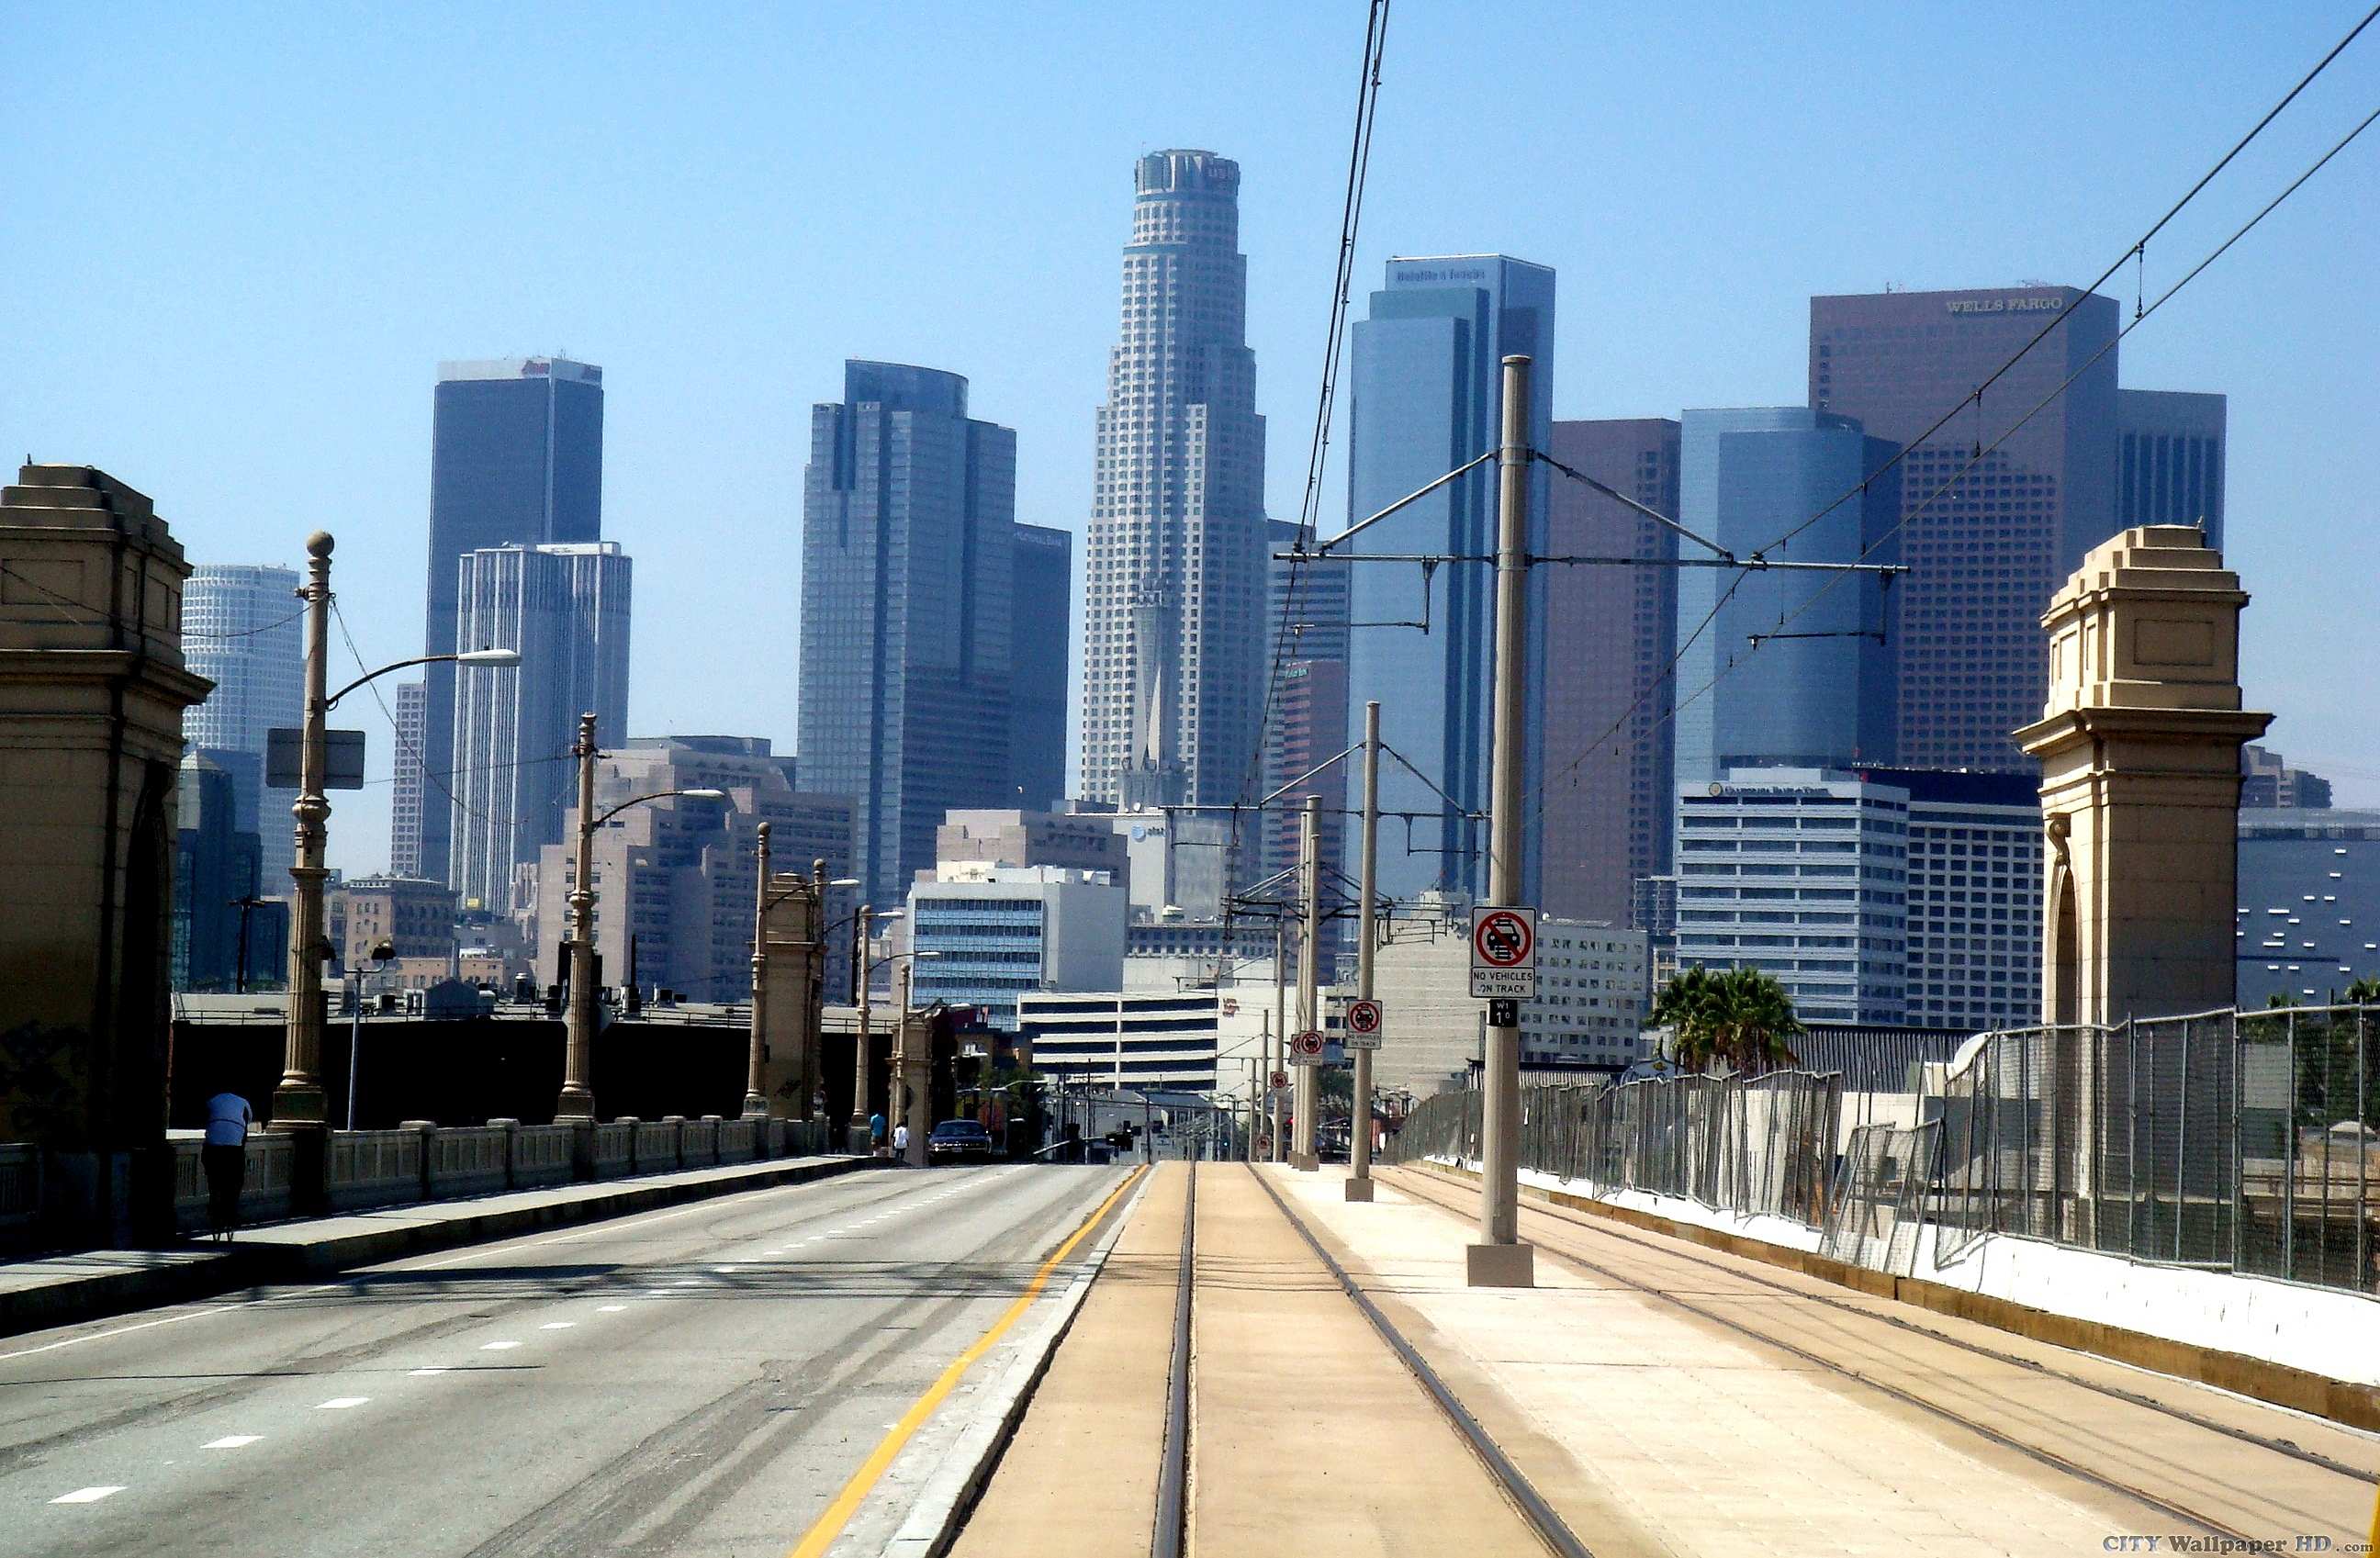 Amazing Los Angeles. Wide Pictures of cities for the tablet. Los angeles.